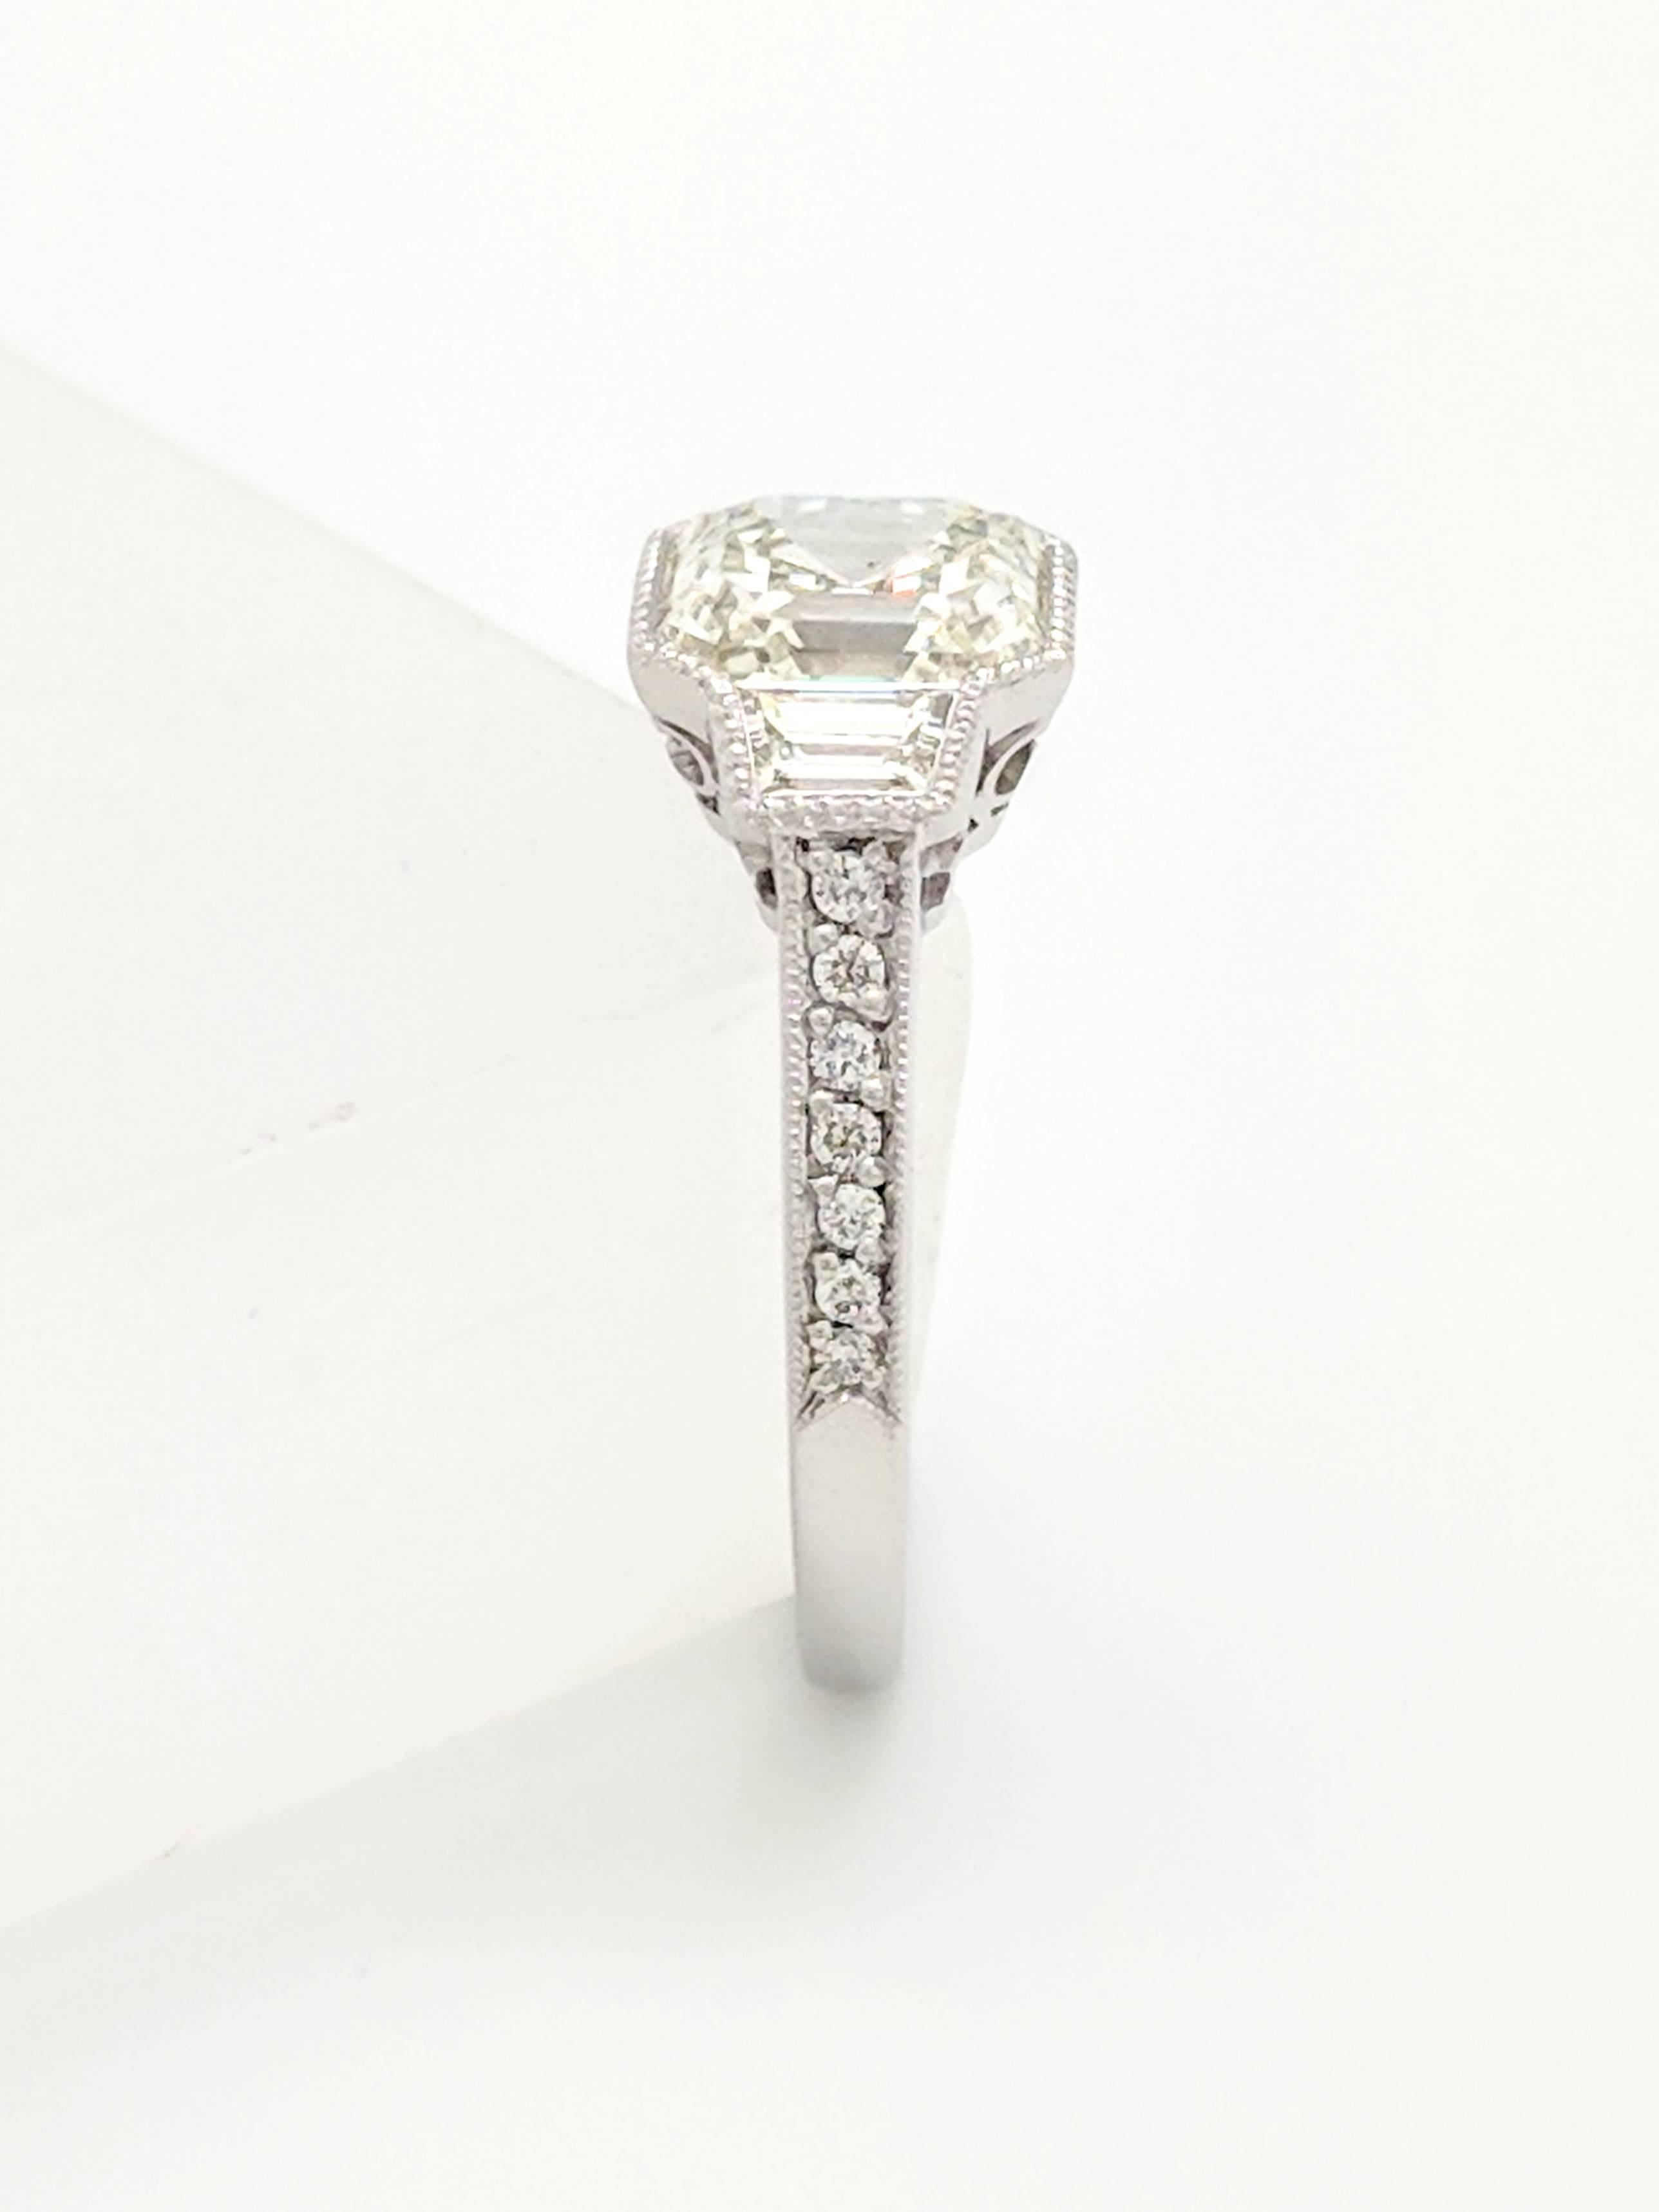 2.51Ct Squared Emerald Cut Natural Diamond Engagement Ring GIA Certified SI1/K For Sale 2